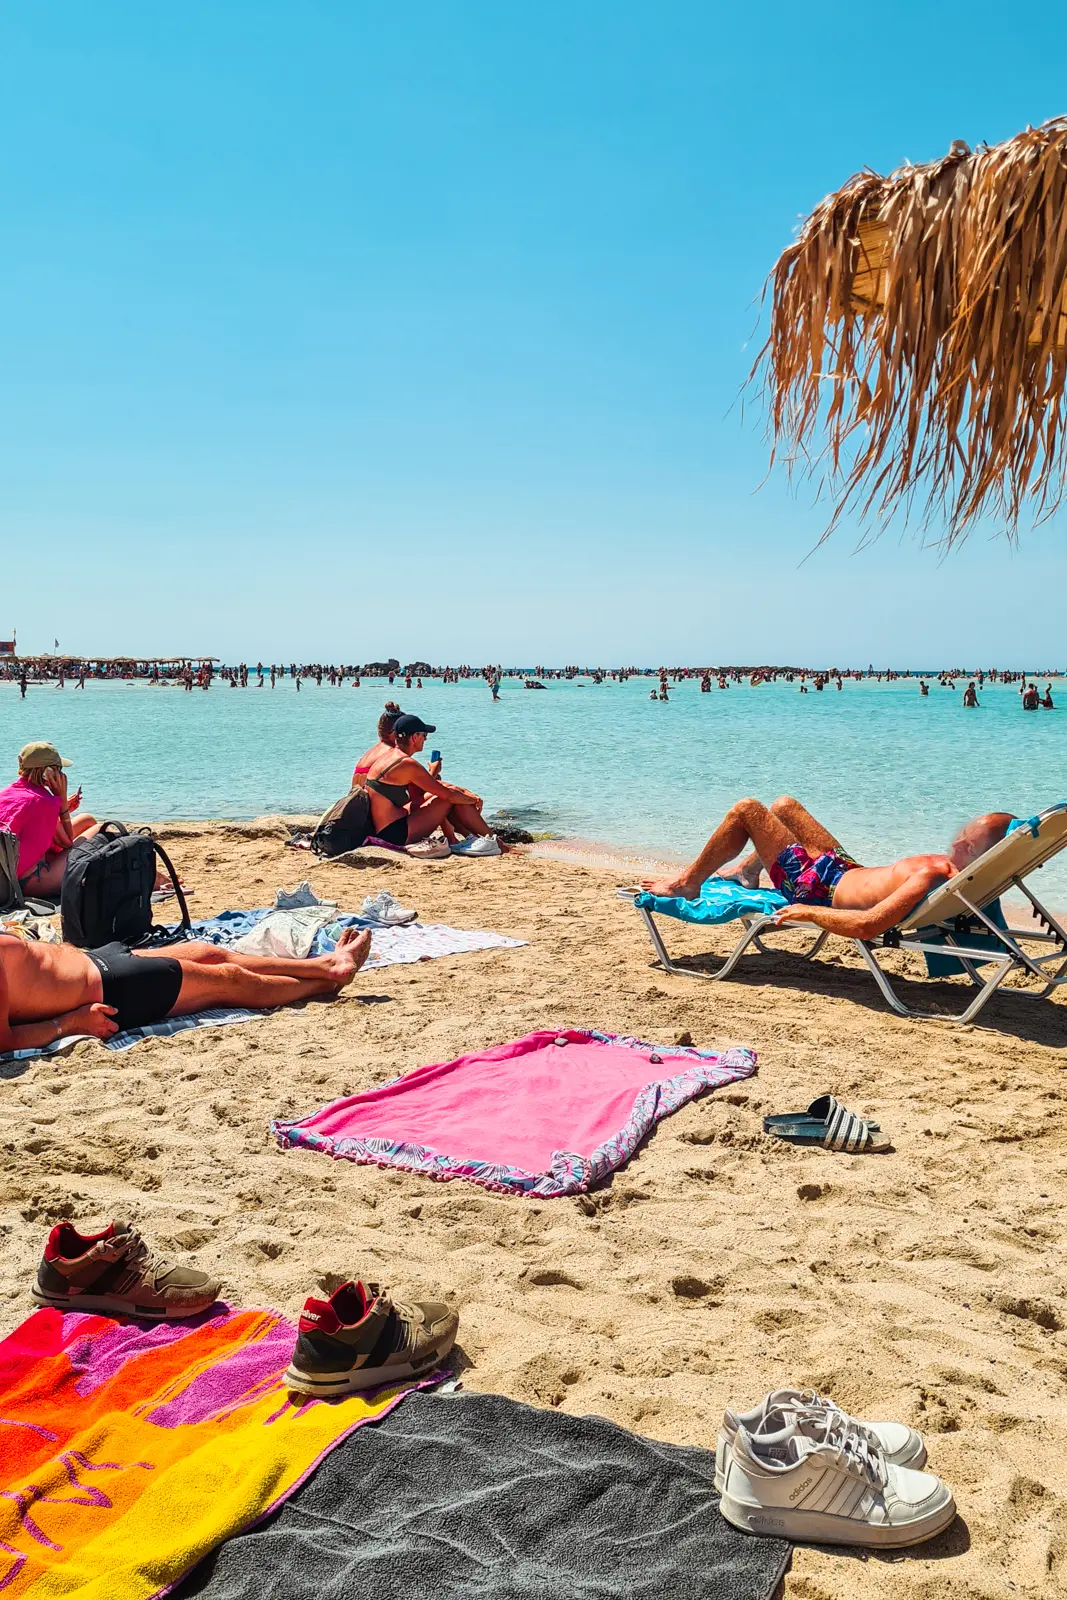 People sitting on towels and sun loungers looking out over the shallow water at Elafonisi Beach on a sunny day in August.